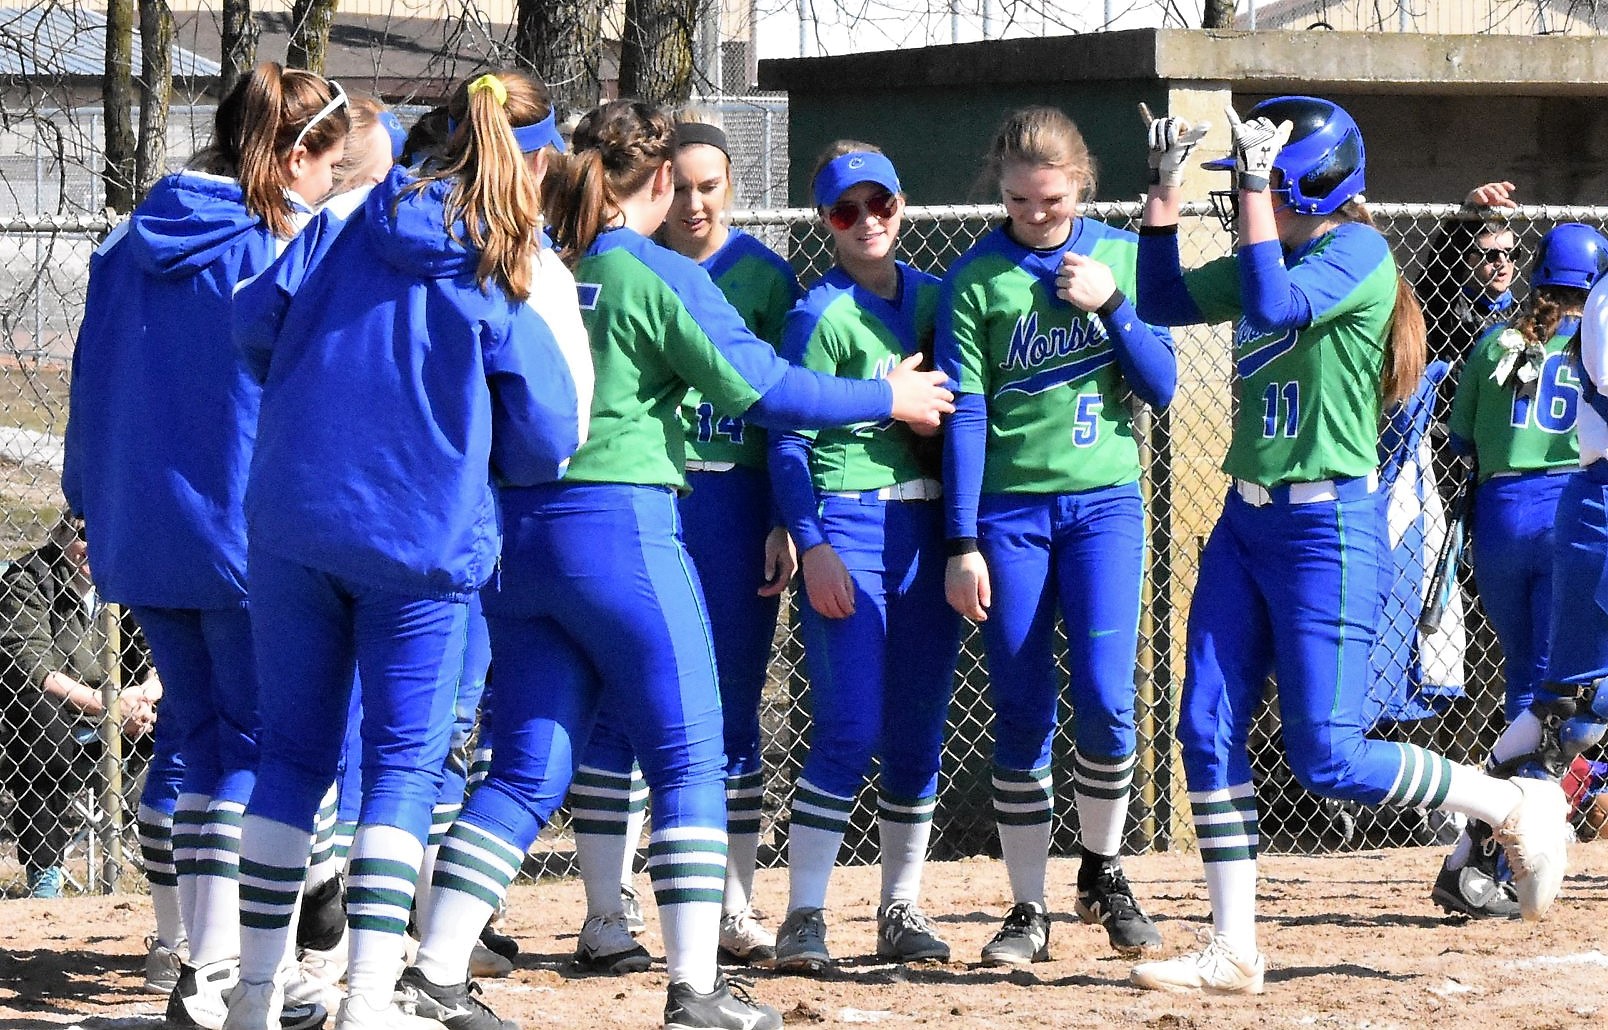 Kaitlyn Hardwick crosses the plate after hitting a homerun, her teammates surround the plate